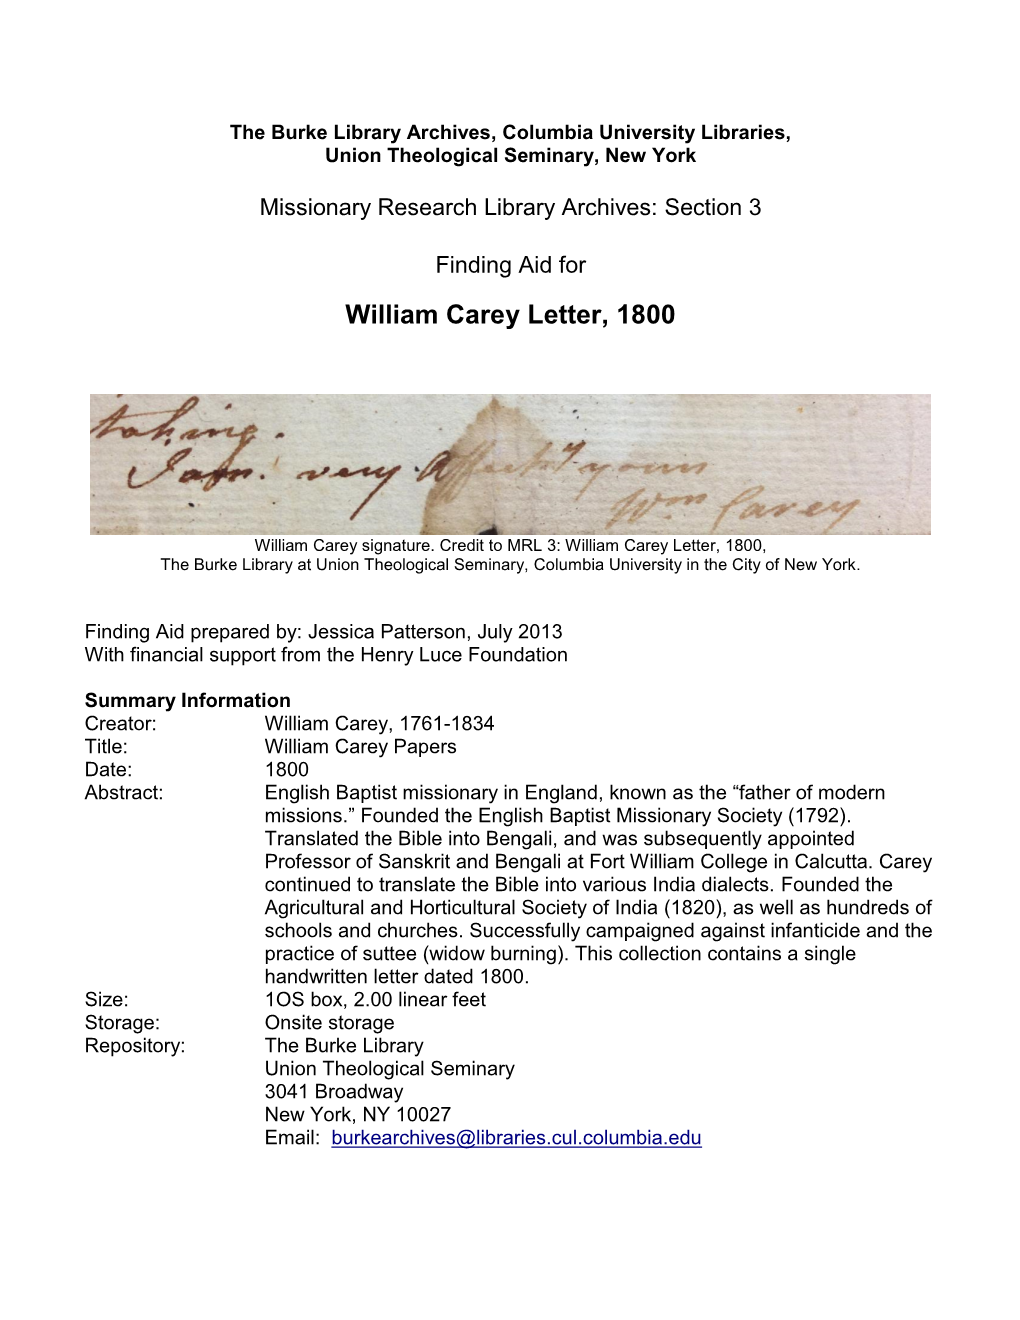 MRL 3: William Carey Letter, 1800, the Burke Library at Union Theological Seminary, Columbia University in the City of New York